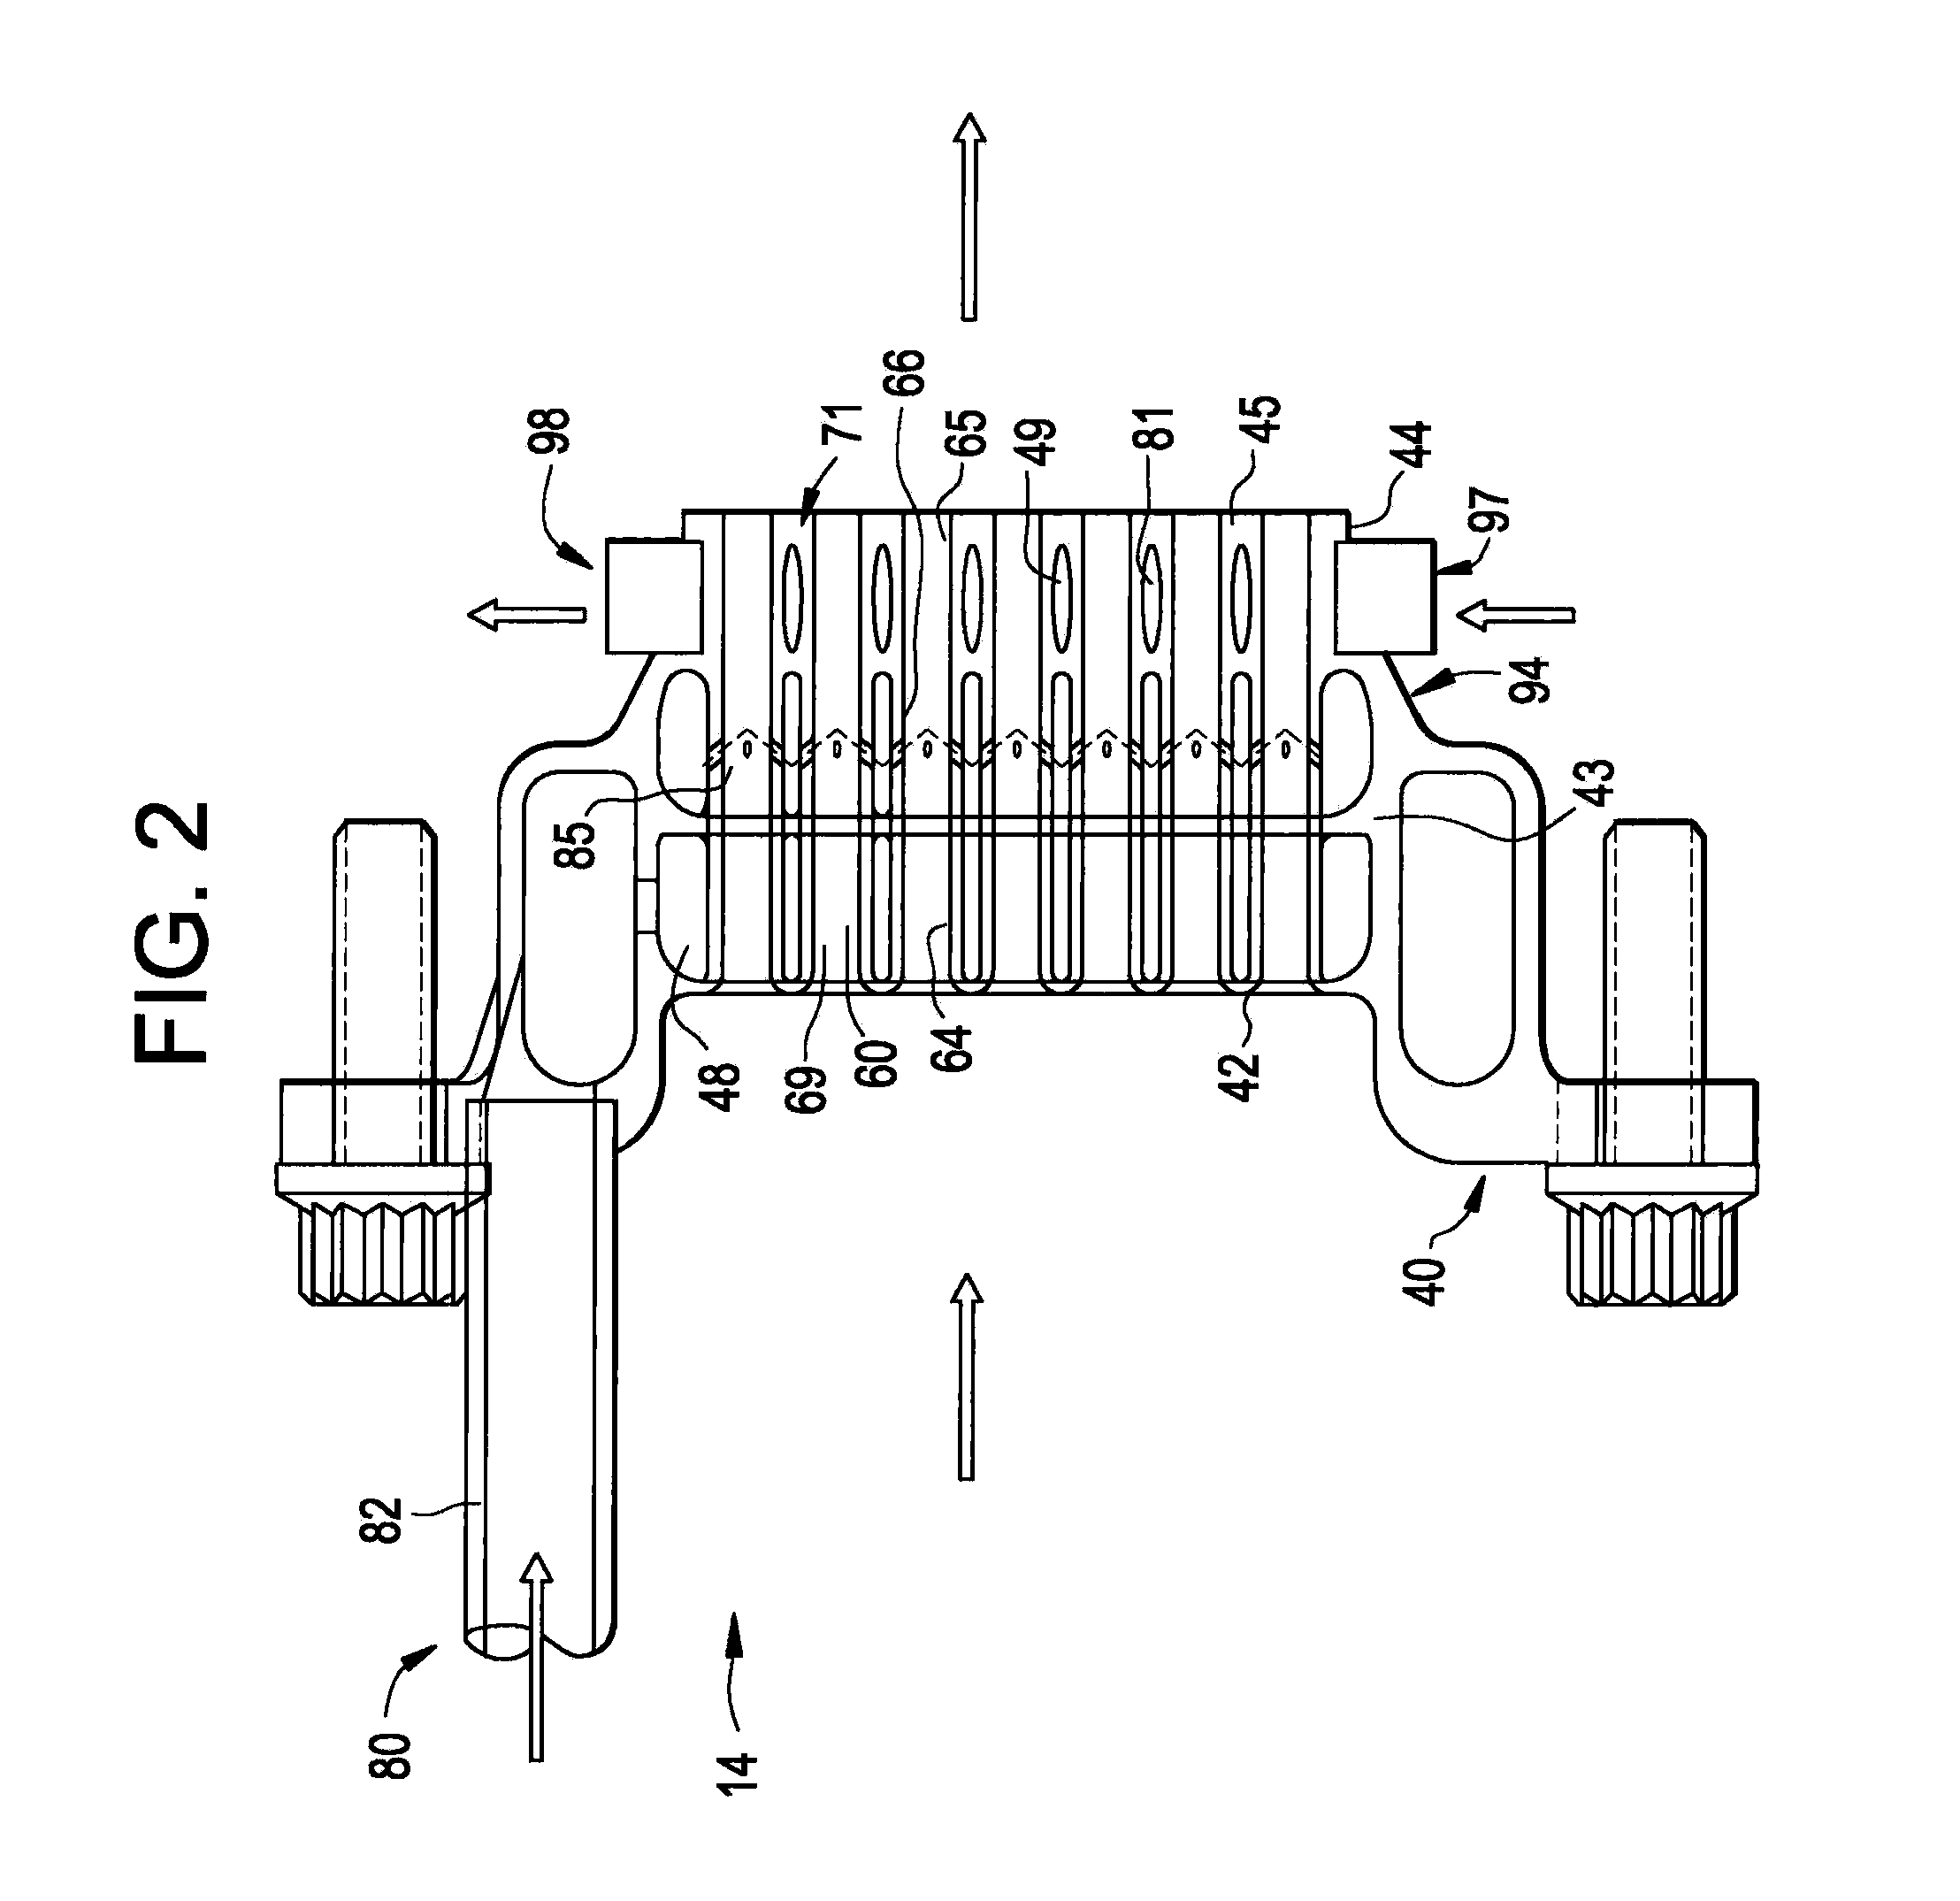 Turbomachine injection nozzle including a coolant delivery system